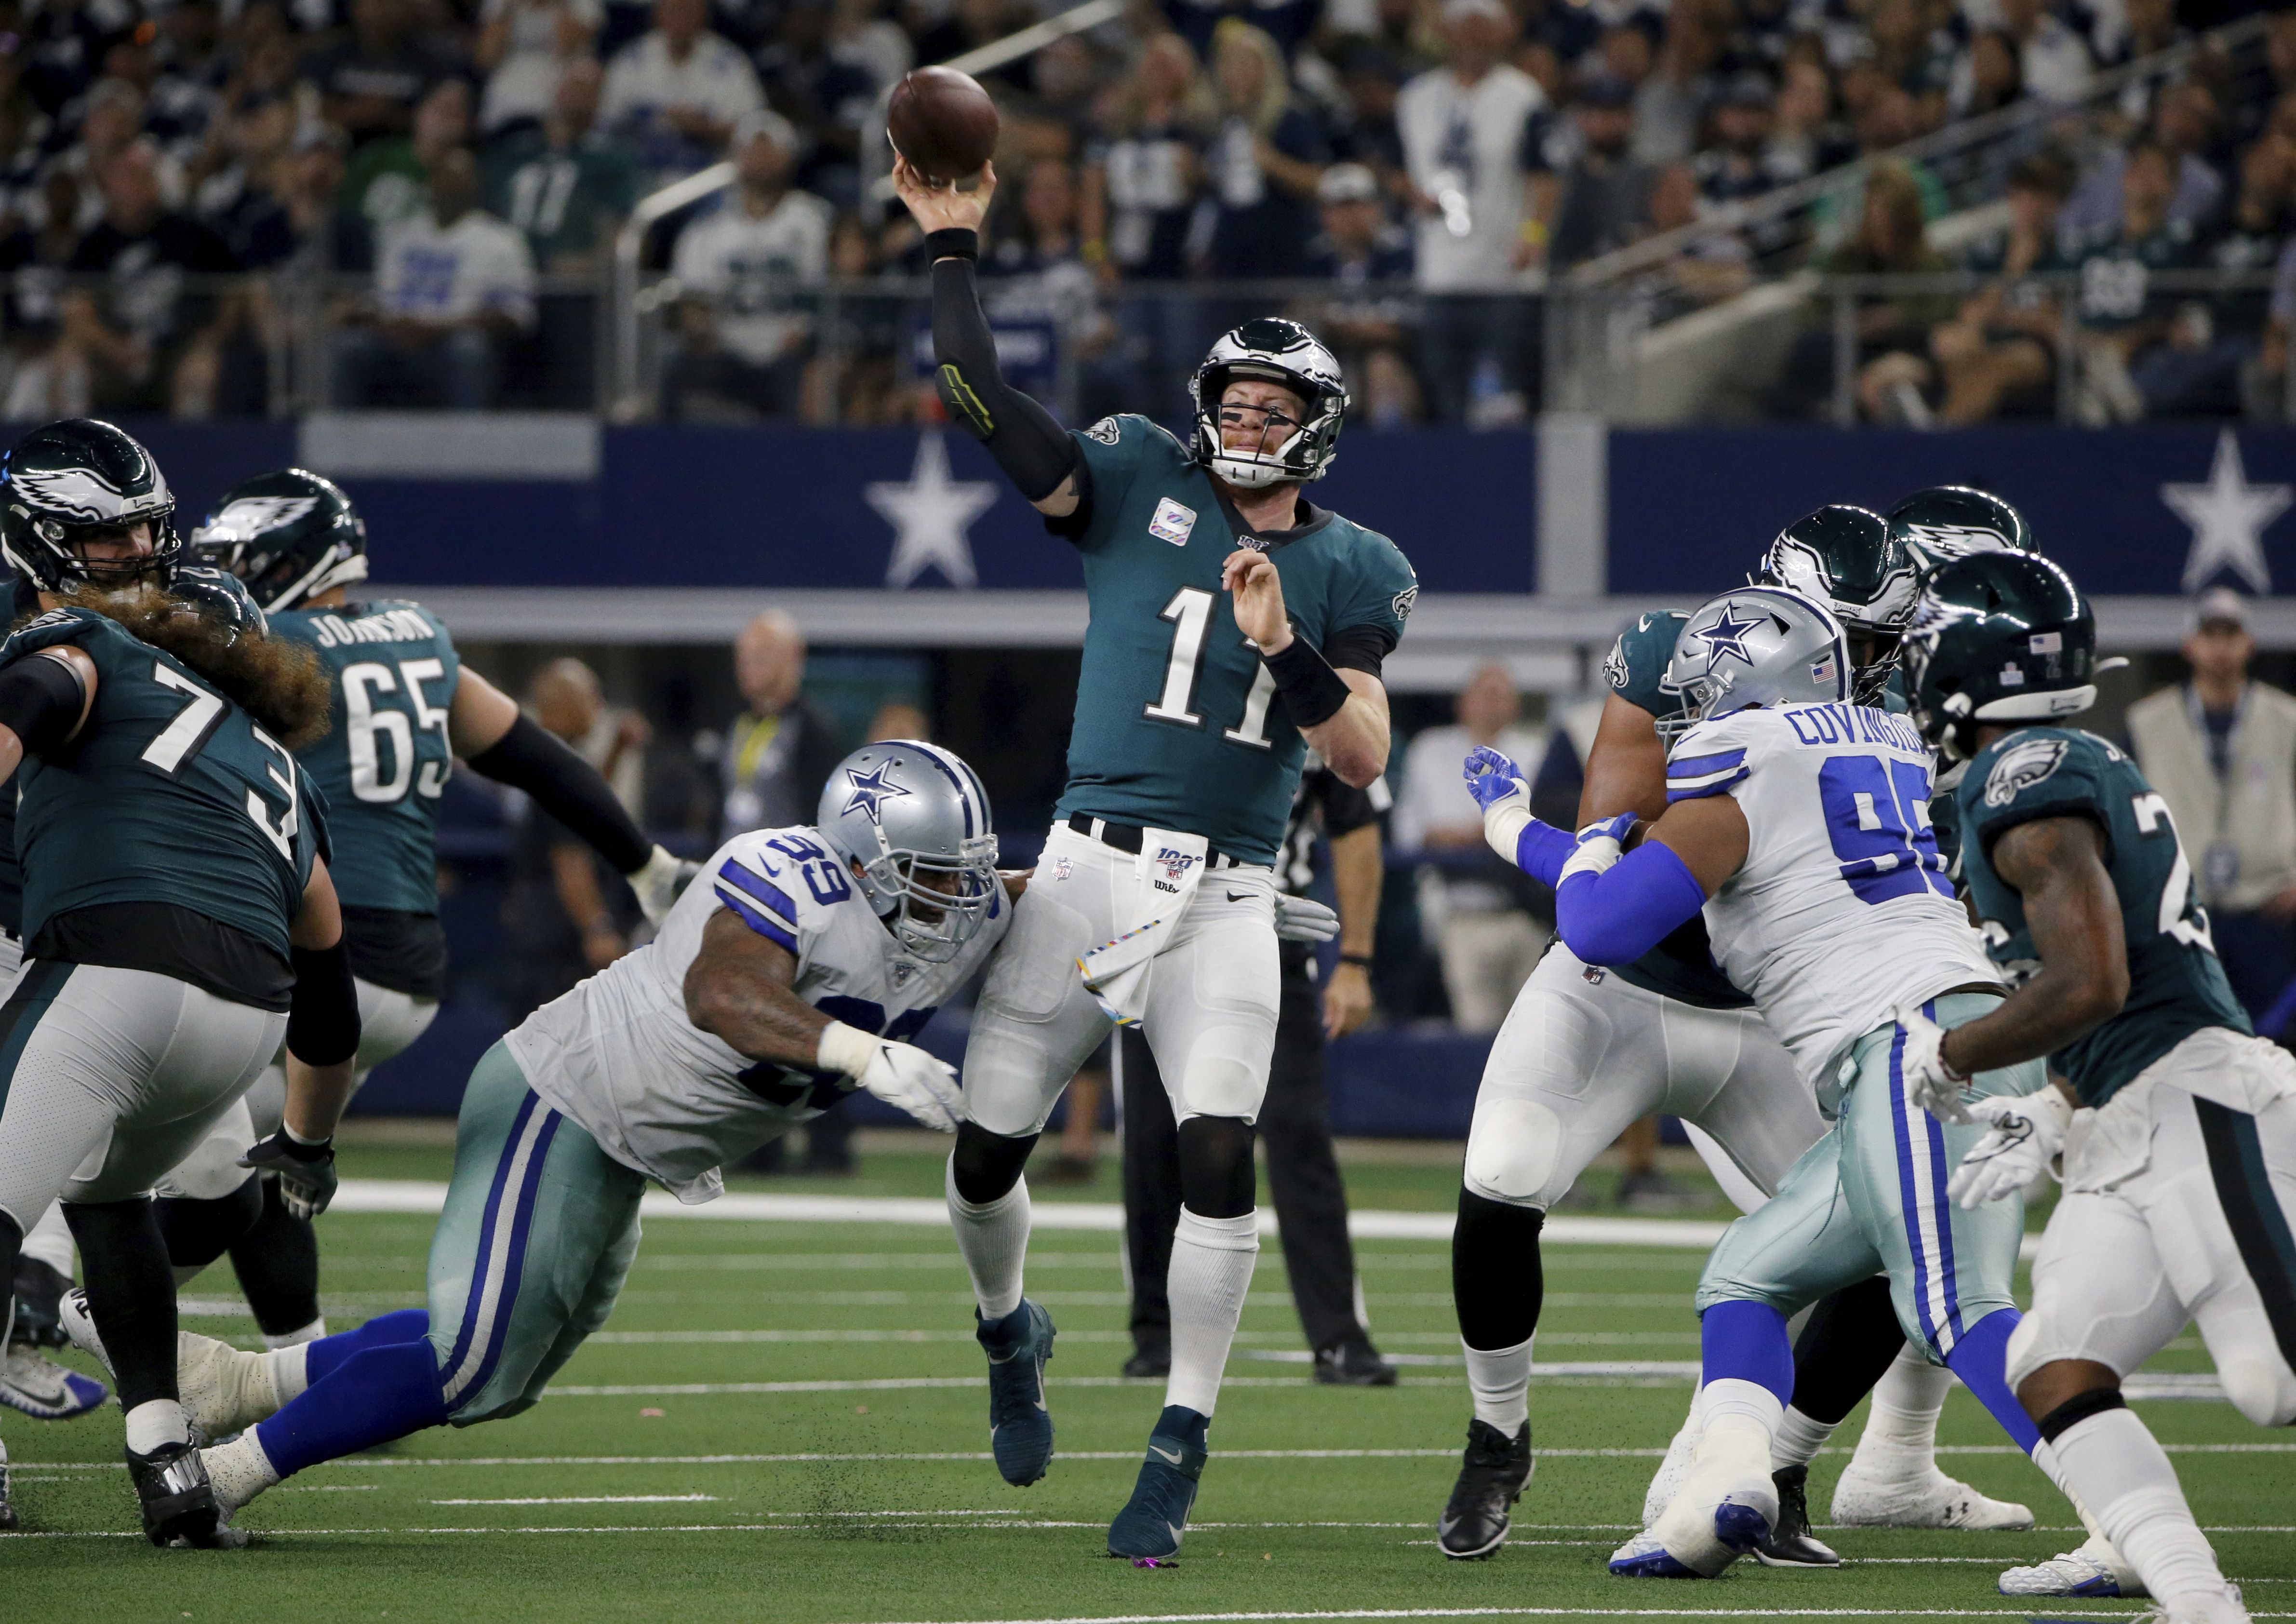 Cowboys vs. Eagles Week 3 (2021): Game time, TV schedule, how to watch  online streaming, radio - Revenge of the Birds